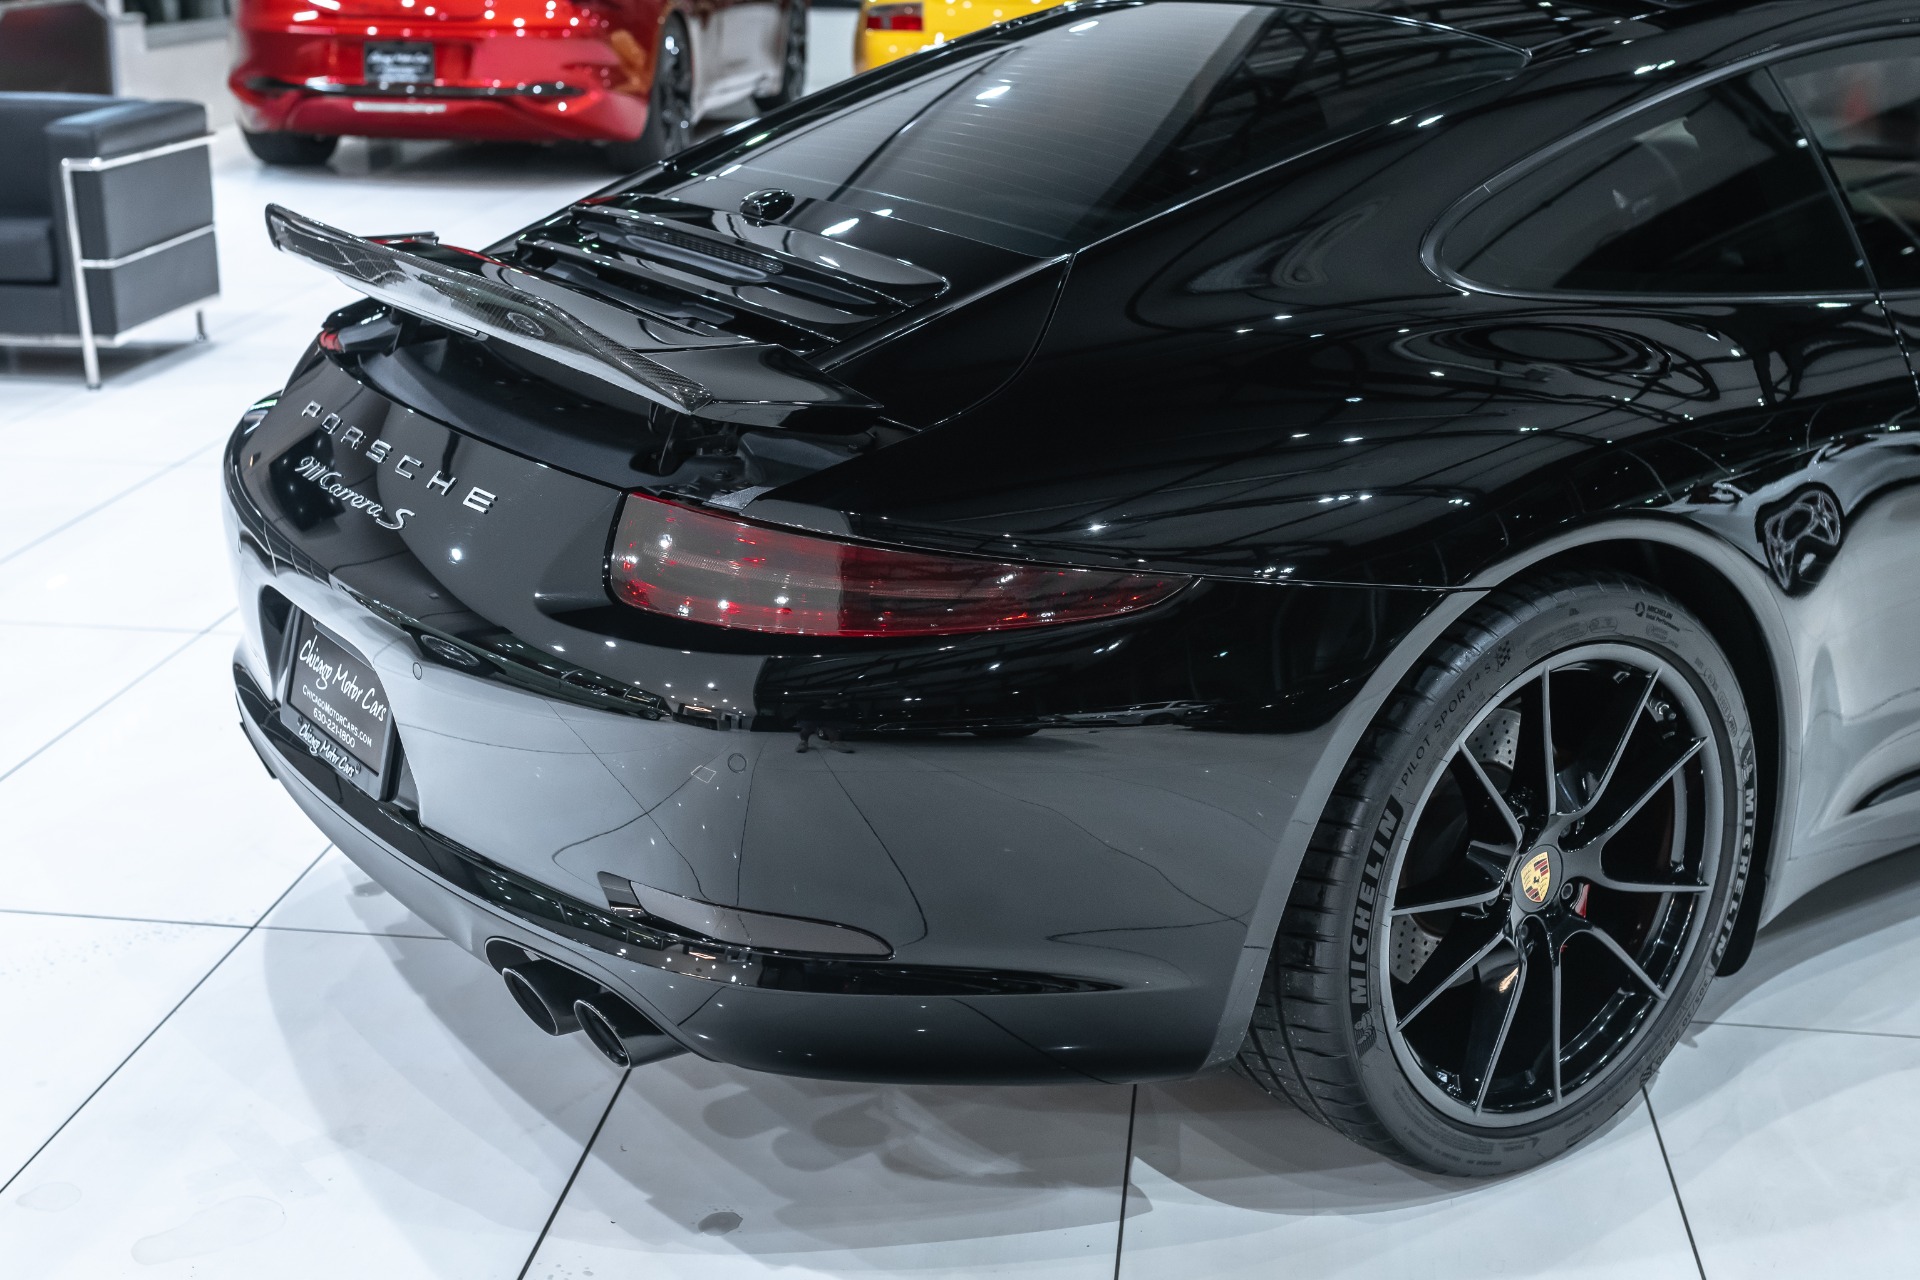 Used 2012 Porsche 911 Carrera S PDK! Launch Edition 991! Sport Exhaust!  $111k+ MSRP! For Sale (Special Pricing) | Chicago Motor Cars Stock #19667